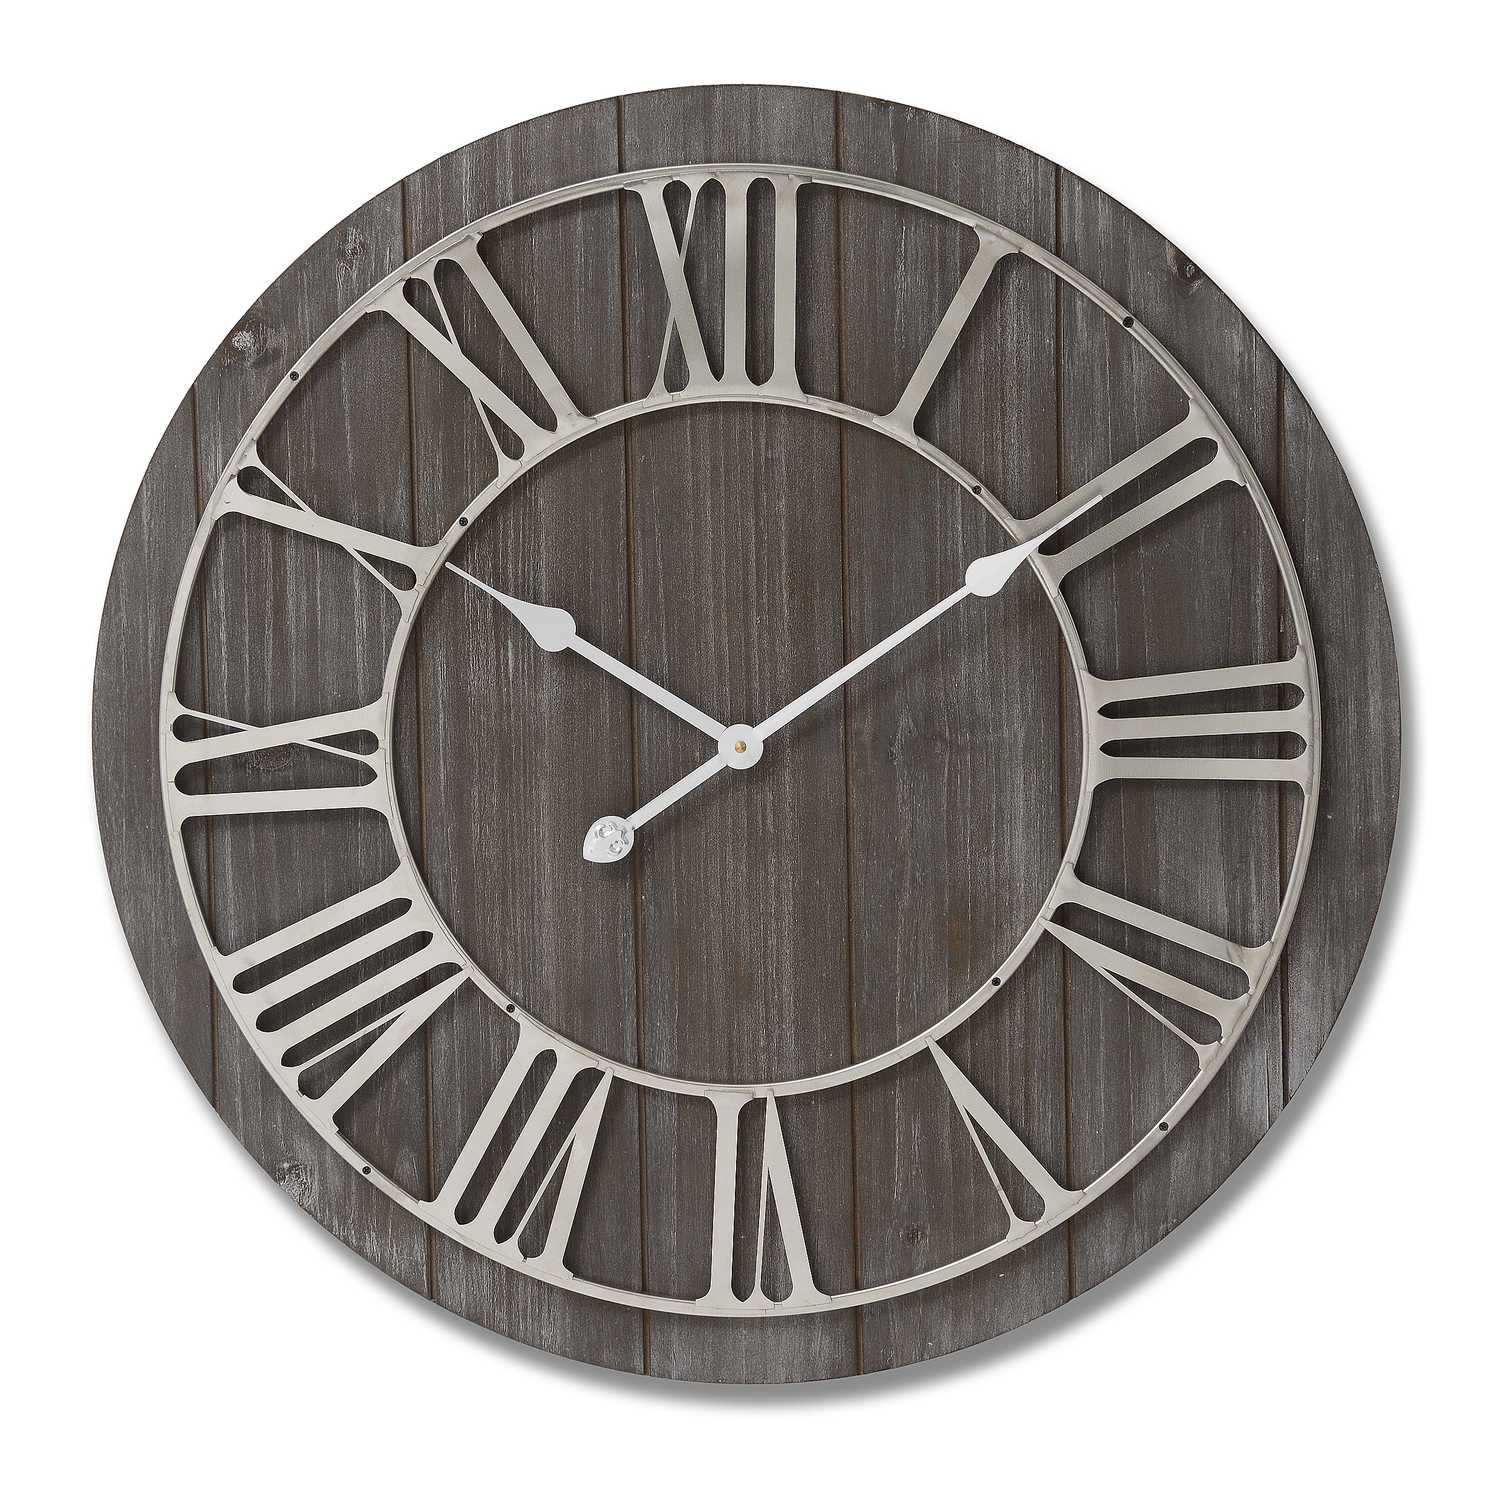 Wooden Clock With Contrasting Nickel Detail